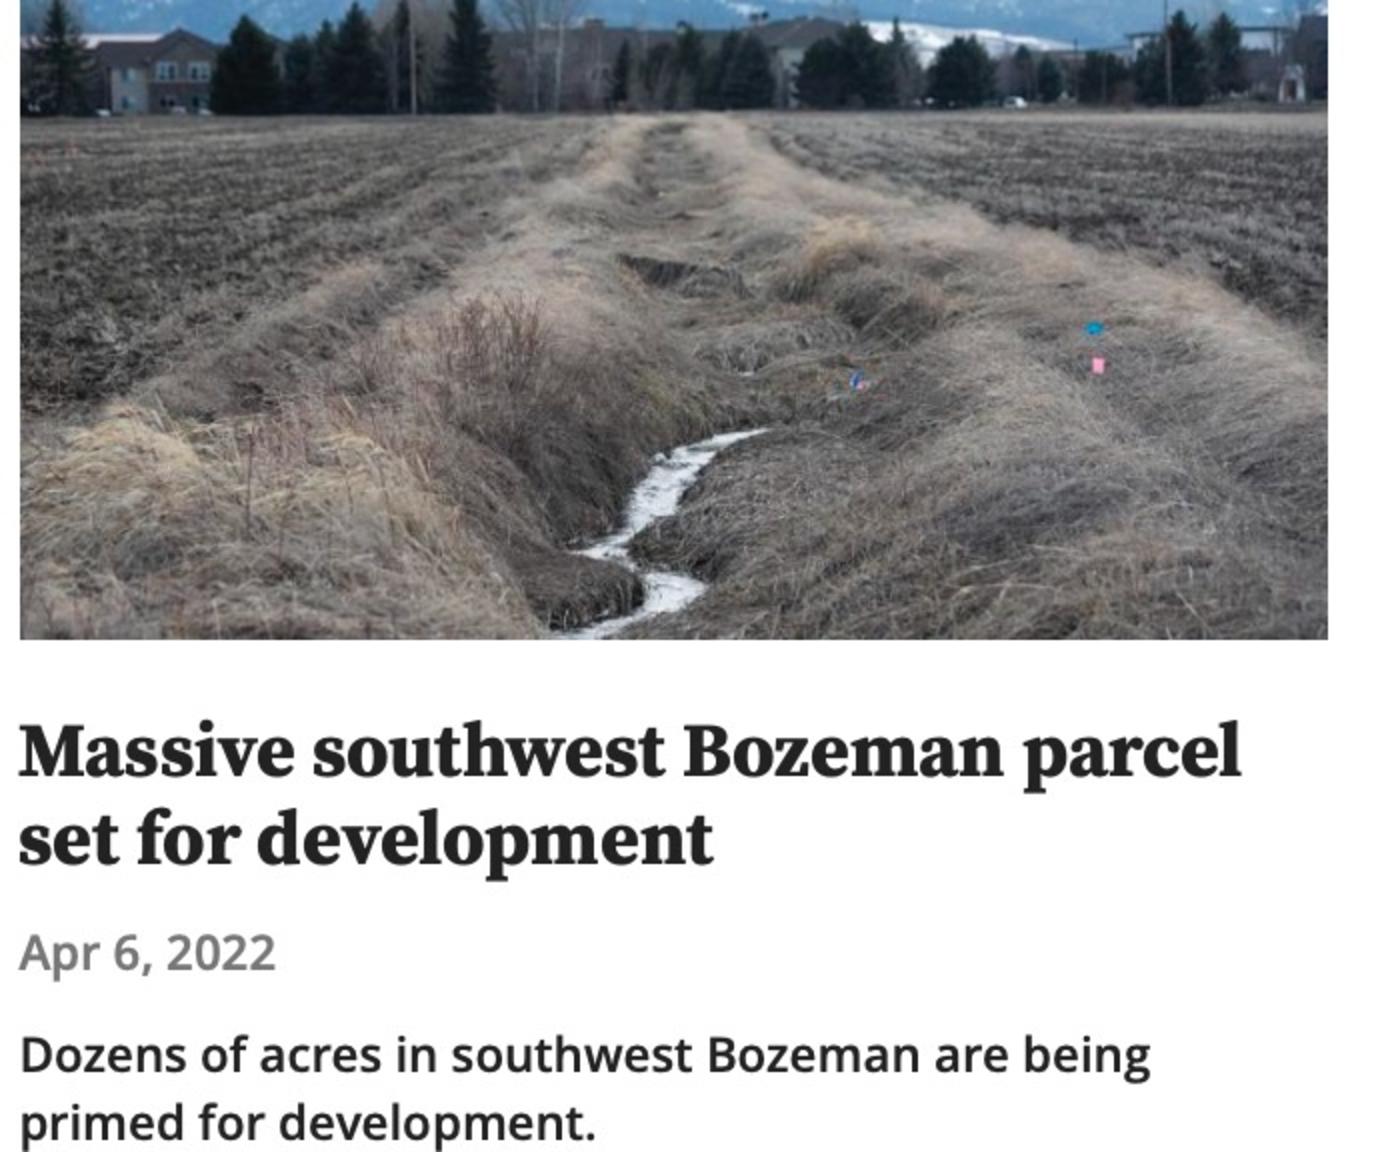 Here and below are headlines from the Bozeman Daily Chronicle newspaper about a surge of residential subdivision proposals approved by Gallatin County and the city of Bozeman, few of which have undergone significant review by experienced professional wildlife ecologists. Like many valleys, private land development here is having significant negative ripple effects not on this globally renowned ecosystem but it's happening with almost no significant pushback, including from environmental groups. 